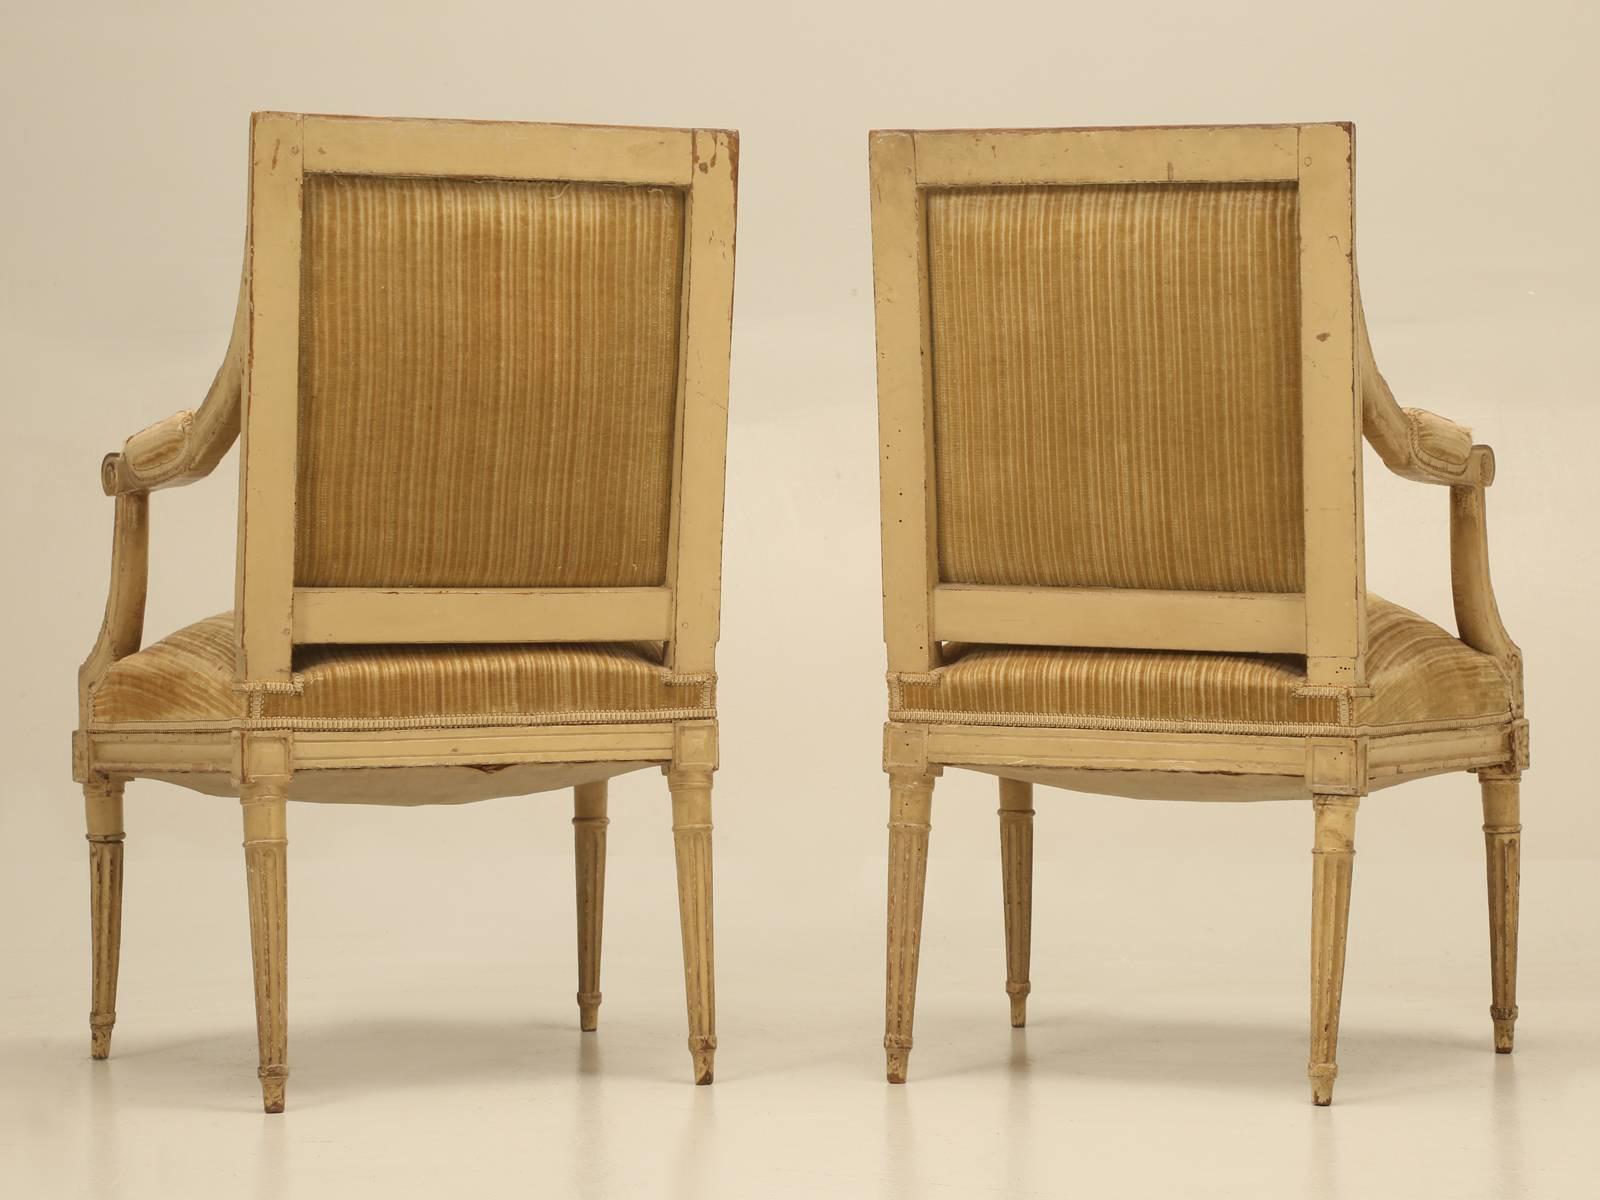 Antique Louis XVI Pair of Armchairs in Original Crumbly Paint with Great Patina For Sale 2